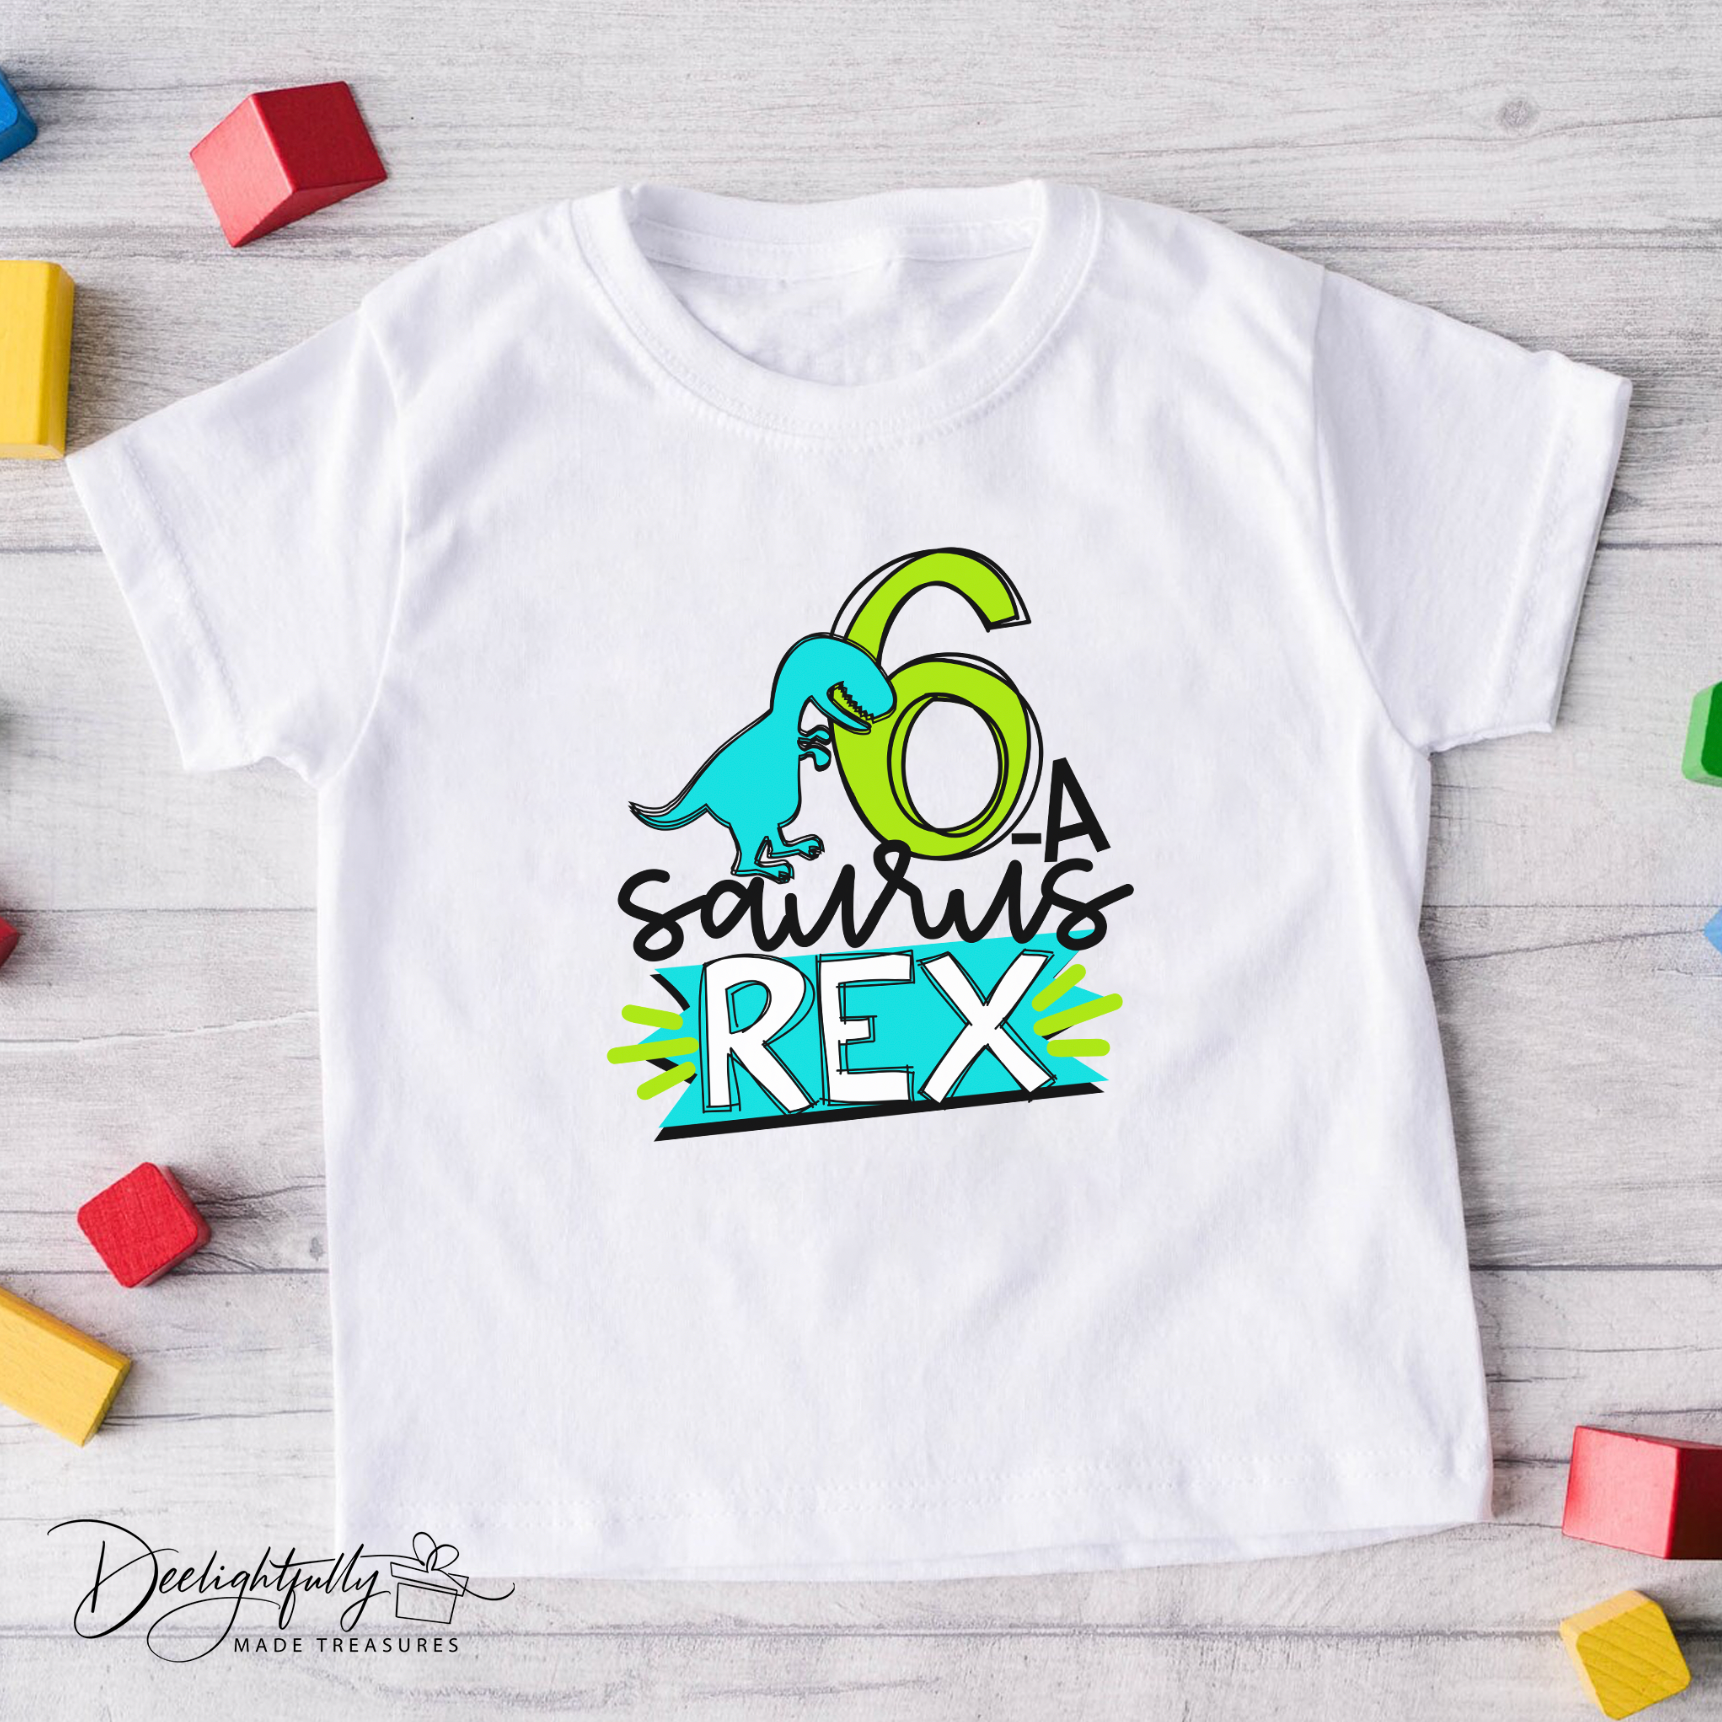 White crewneck Bella + Canvas T-shirt with blue and green dinosaur design